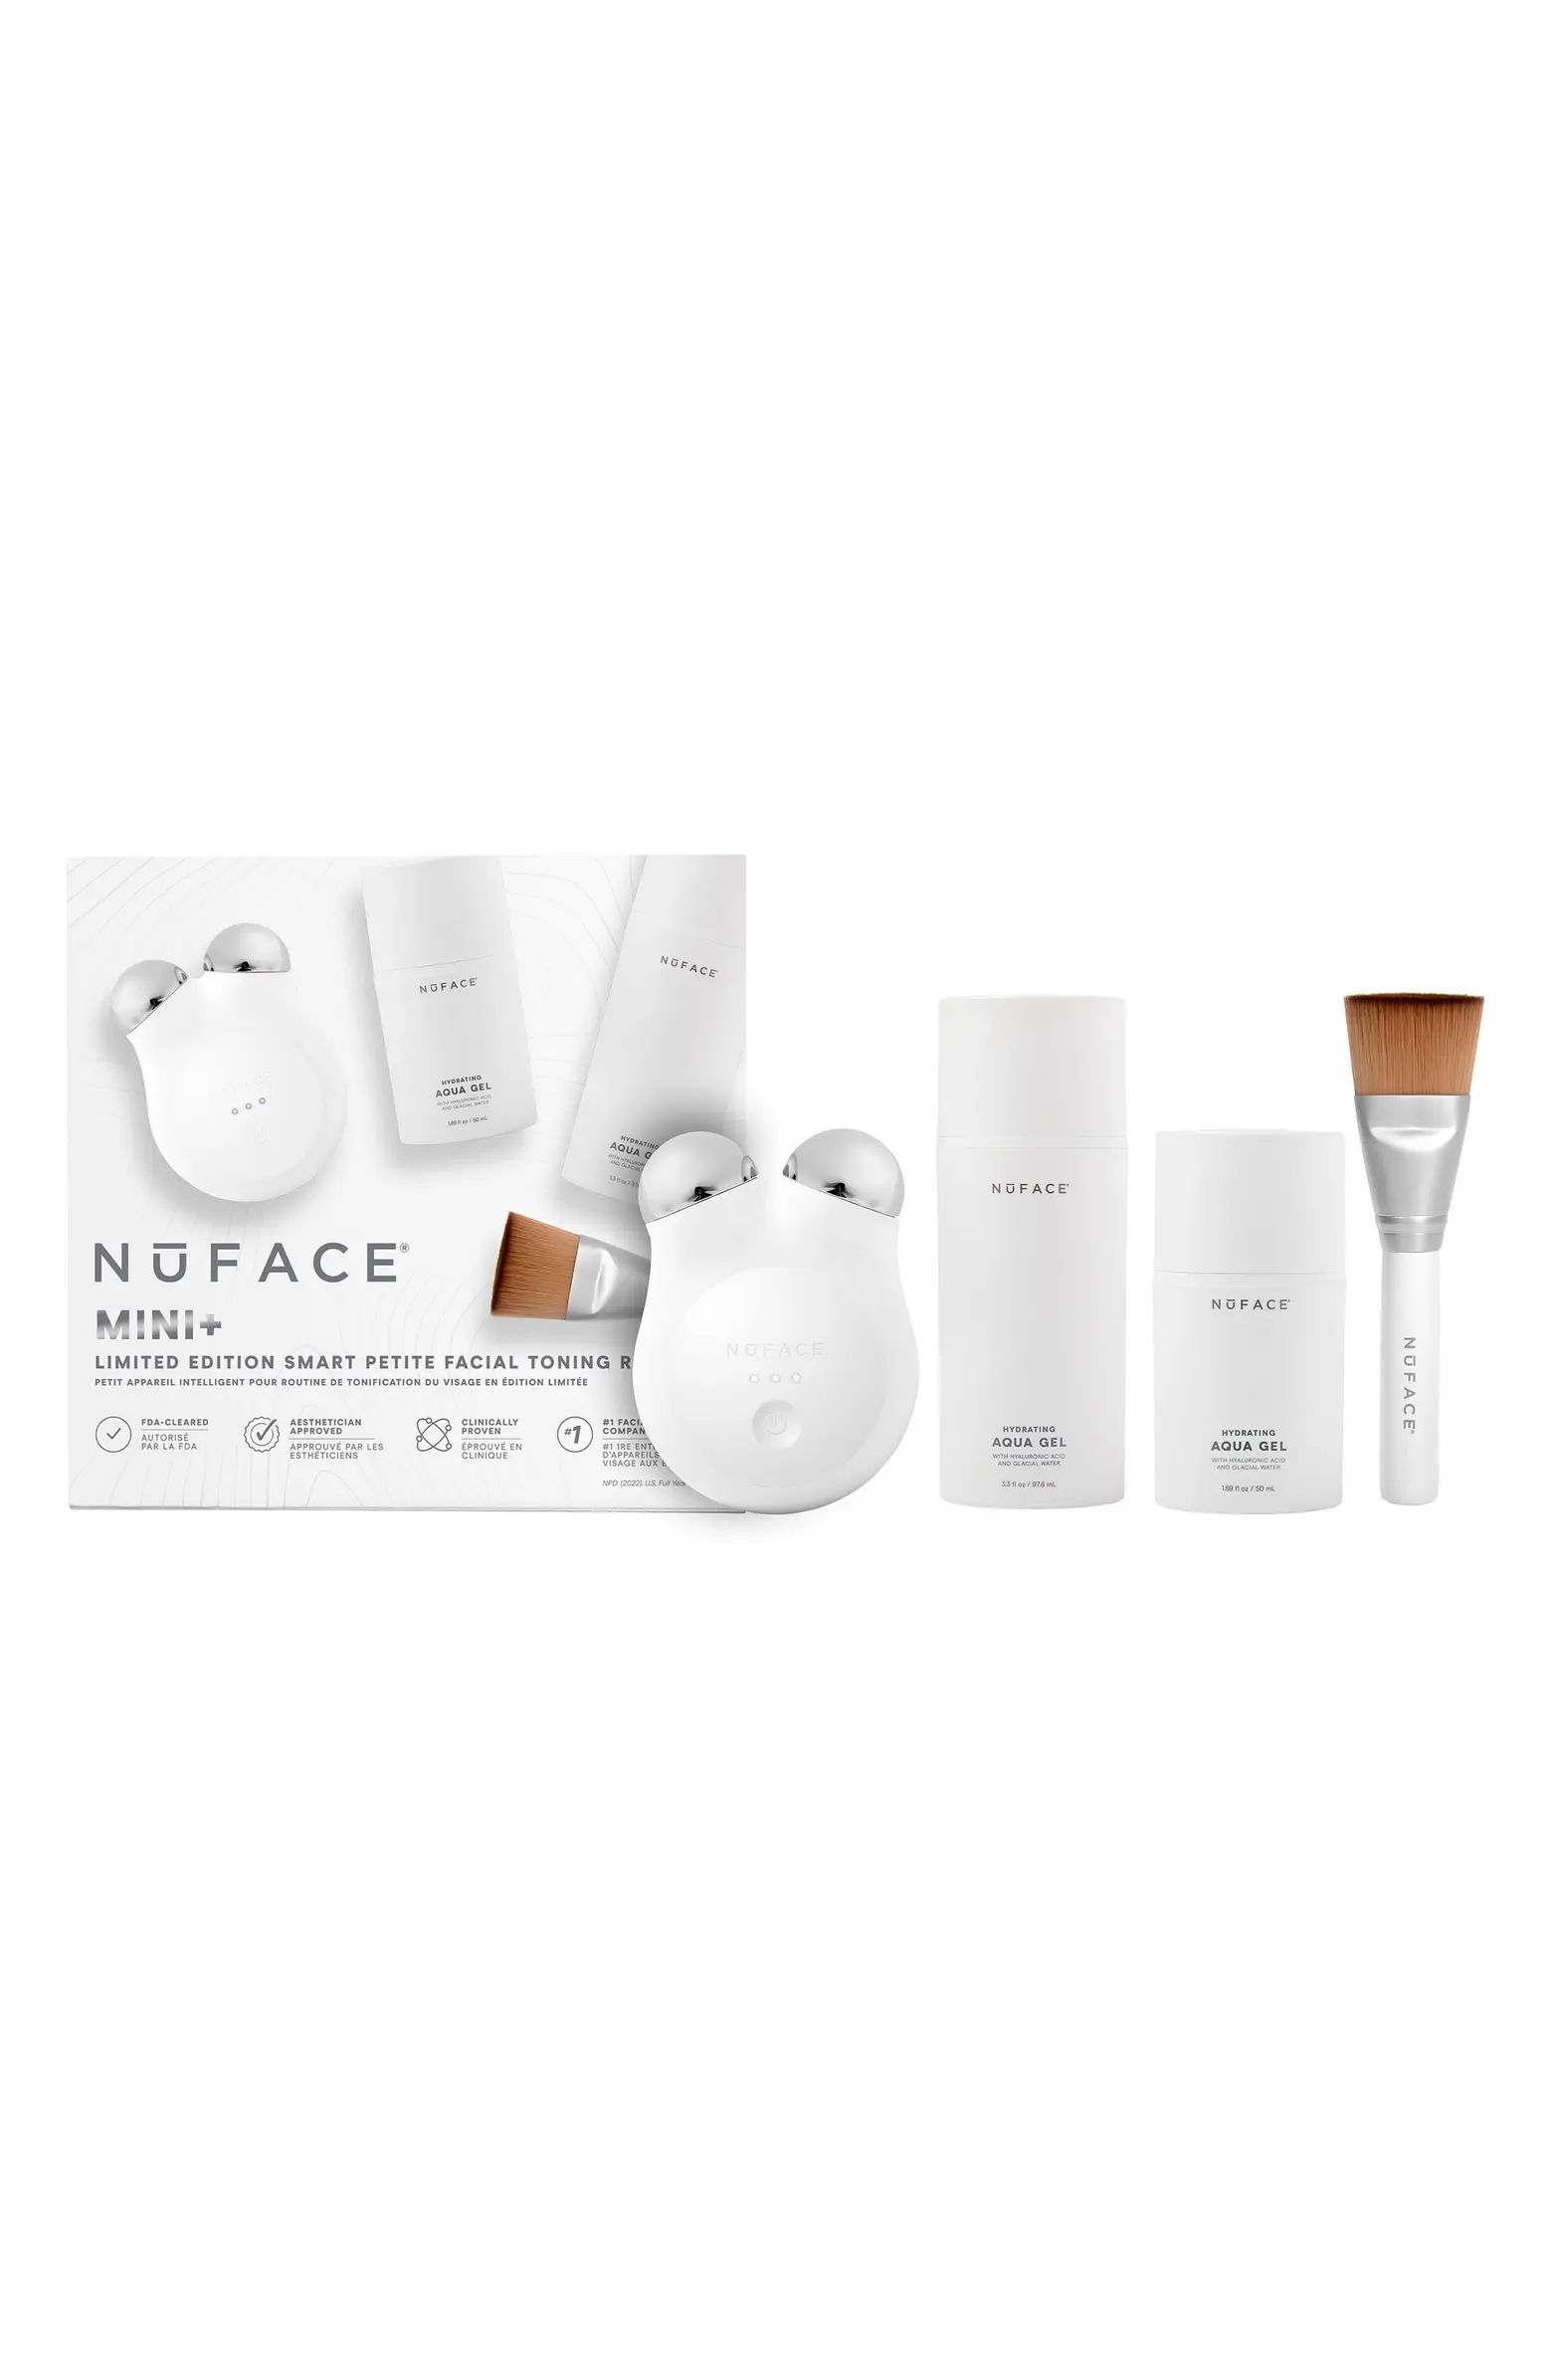 MINI+ Smart Petite Facial Toning Routine Set (Limited Edition) $360 Value | Nordstrom